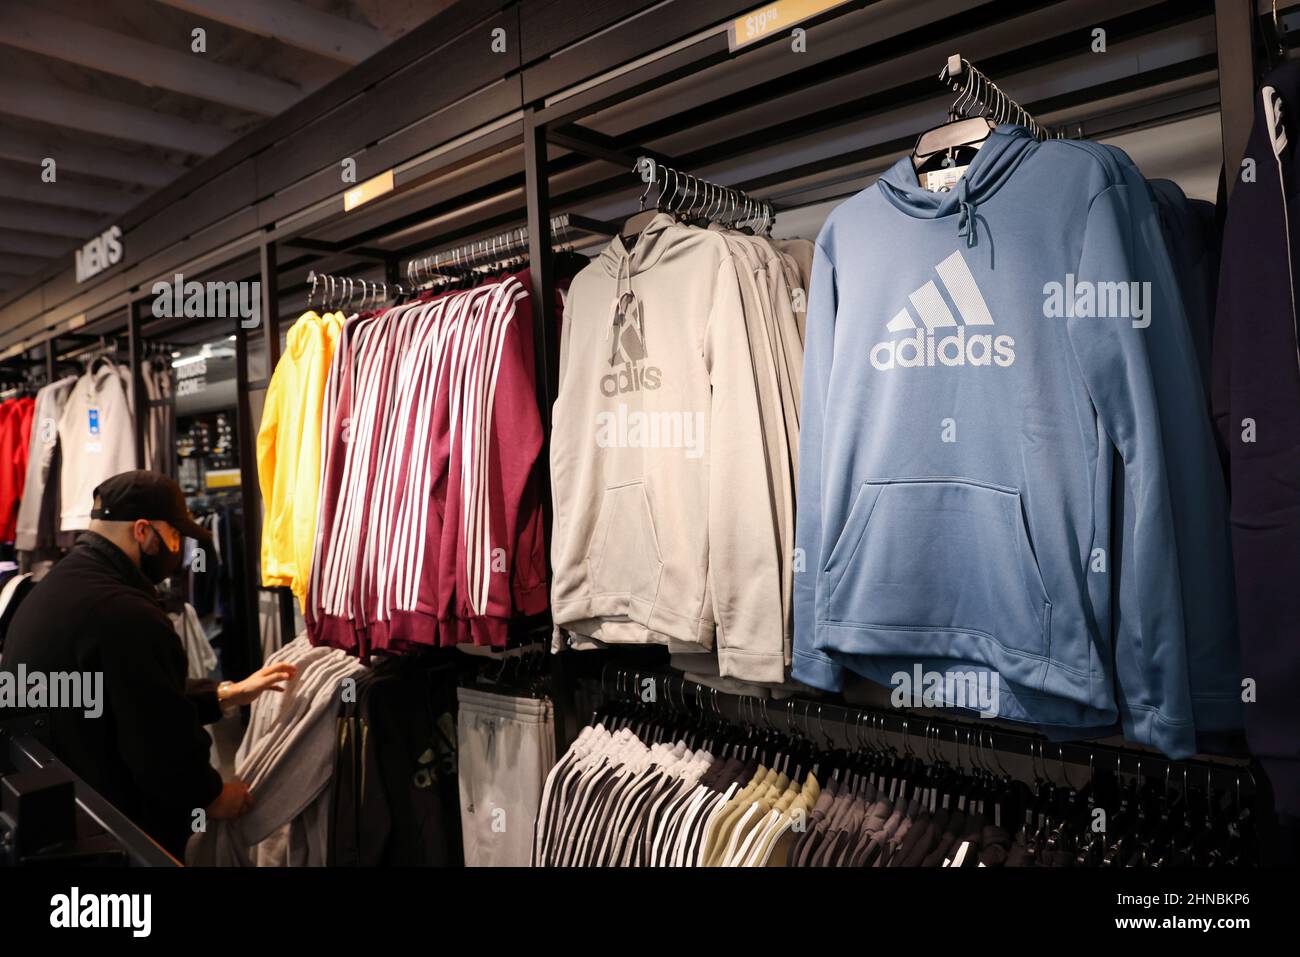 A person looks at clothes in the Adidas store at the Woodbury Common  Premium Outlets in Central Valley, New York, U.S., February 15, 2022.  REUTERS/Andrew Kelly Stock Photo - Alamy